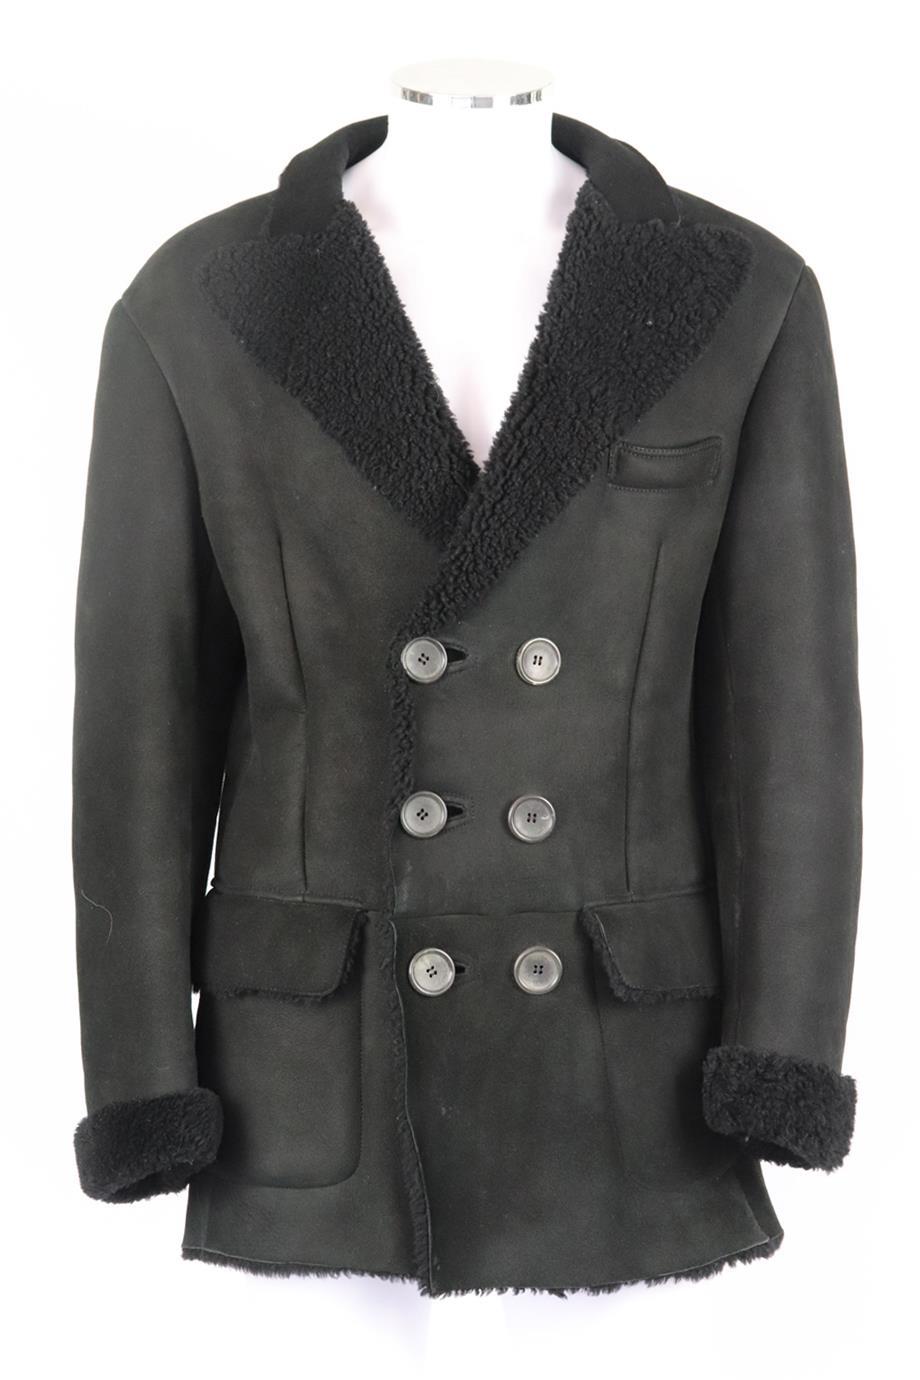 Gucci men's double breasted shearling lined suede coat. Black. Long sleeve, v-neck. Button fastening at front. 100% Leather. Size: IT 50 (Large, EU 50, UK/US Chest 40). Shoulder to shoulder: 20 in. Chest: 44 in. Waist: 42 in. Length: 33 in. Fair